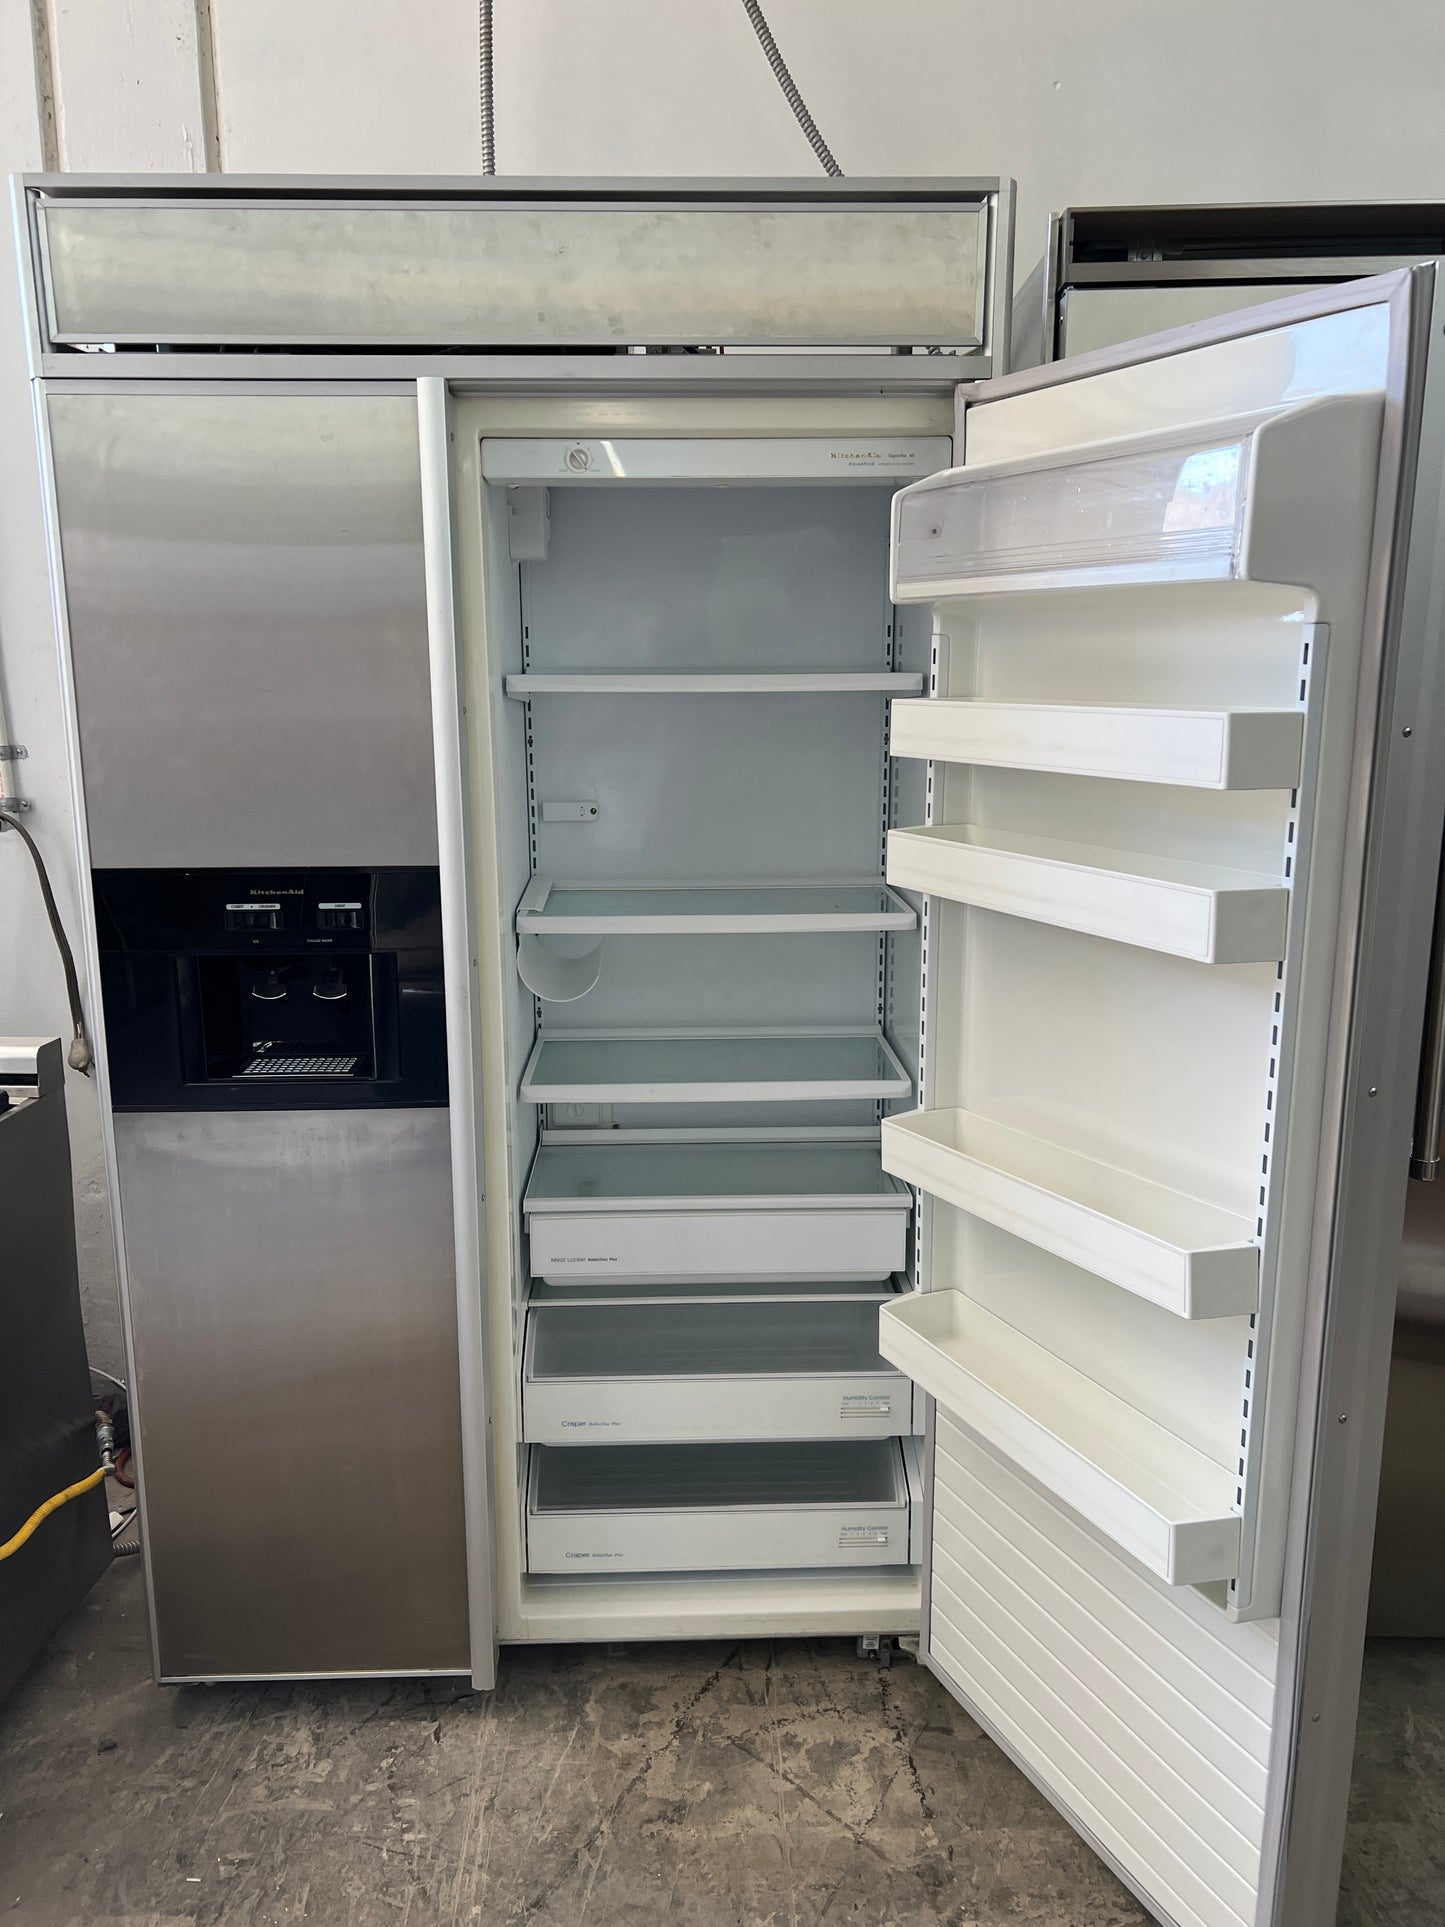 Kitchenaid 48 inch Side By Side Built-in Refrigerator in Stainless 369151